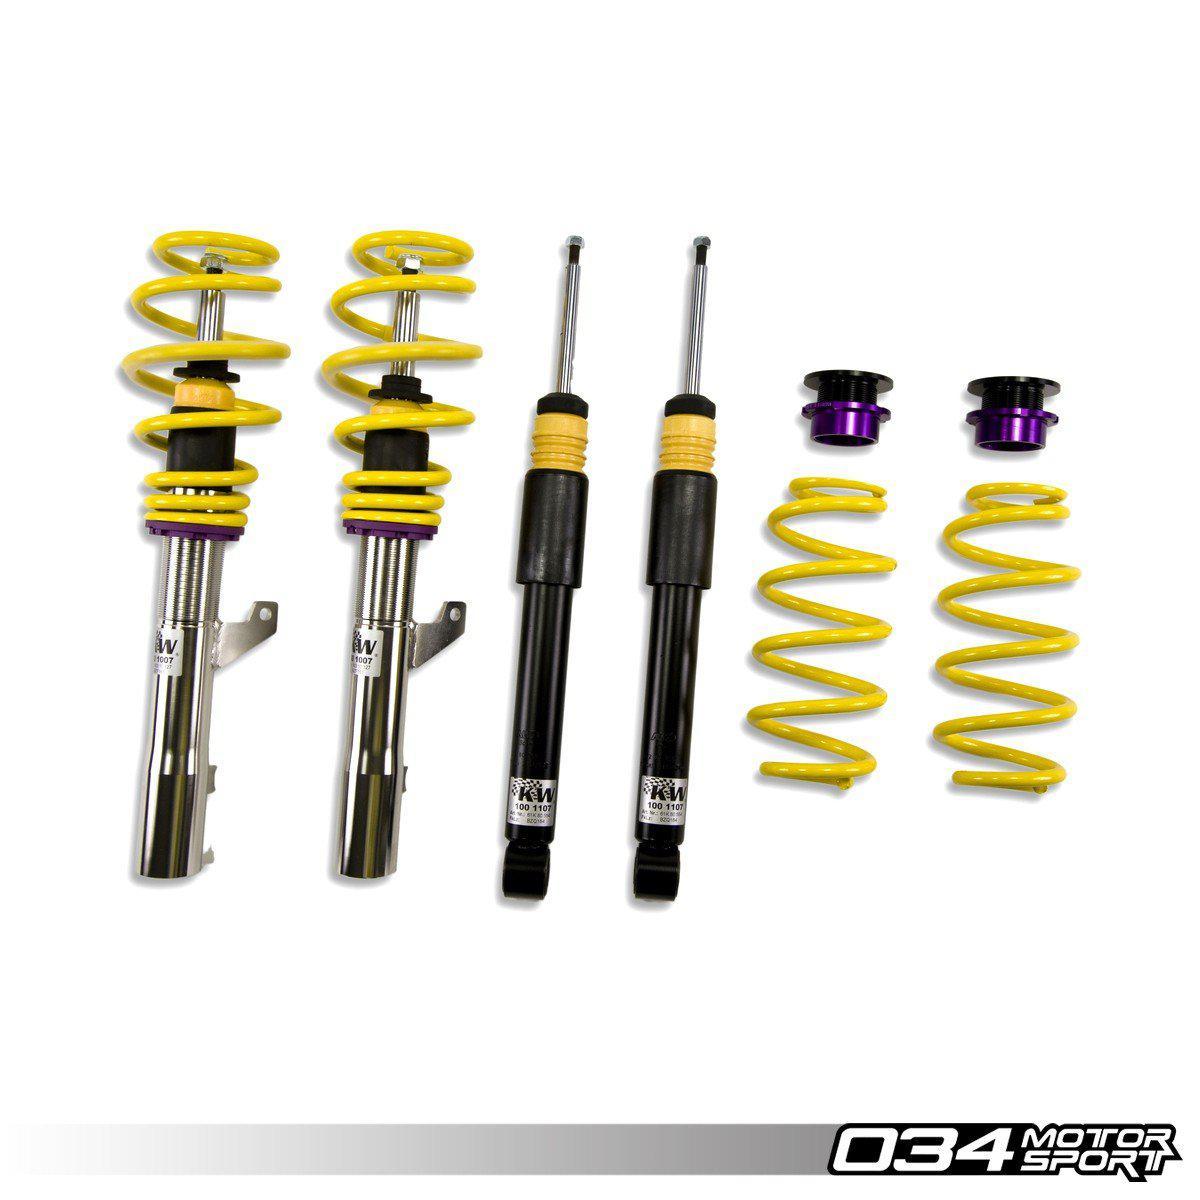 KW Variant 3 Coilover Suspension, MKIV Volkswagen Golf/GTI FWD-A Little Tuning Co